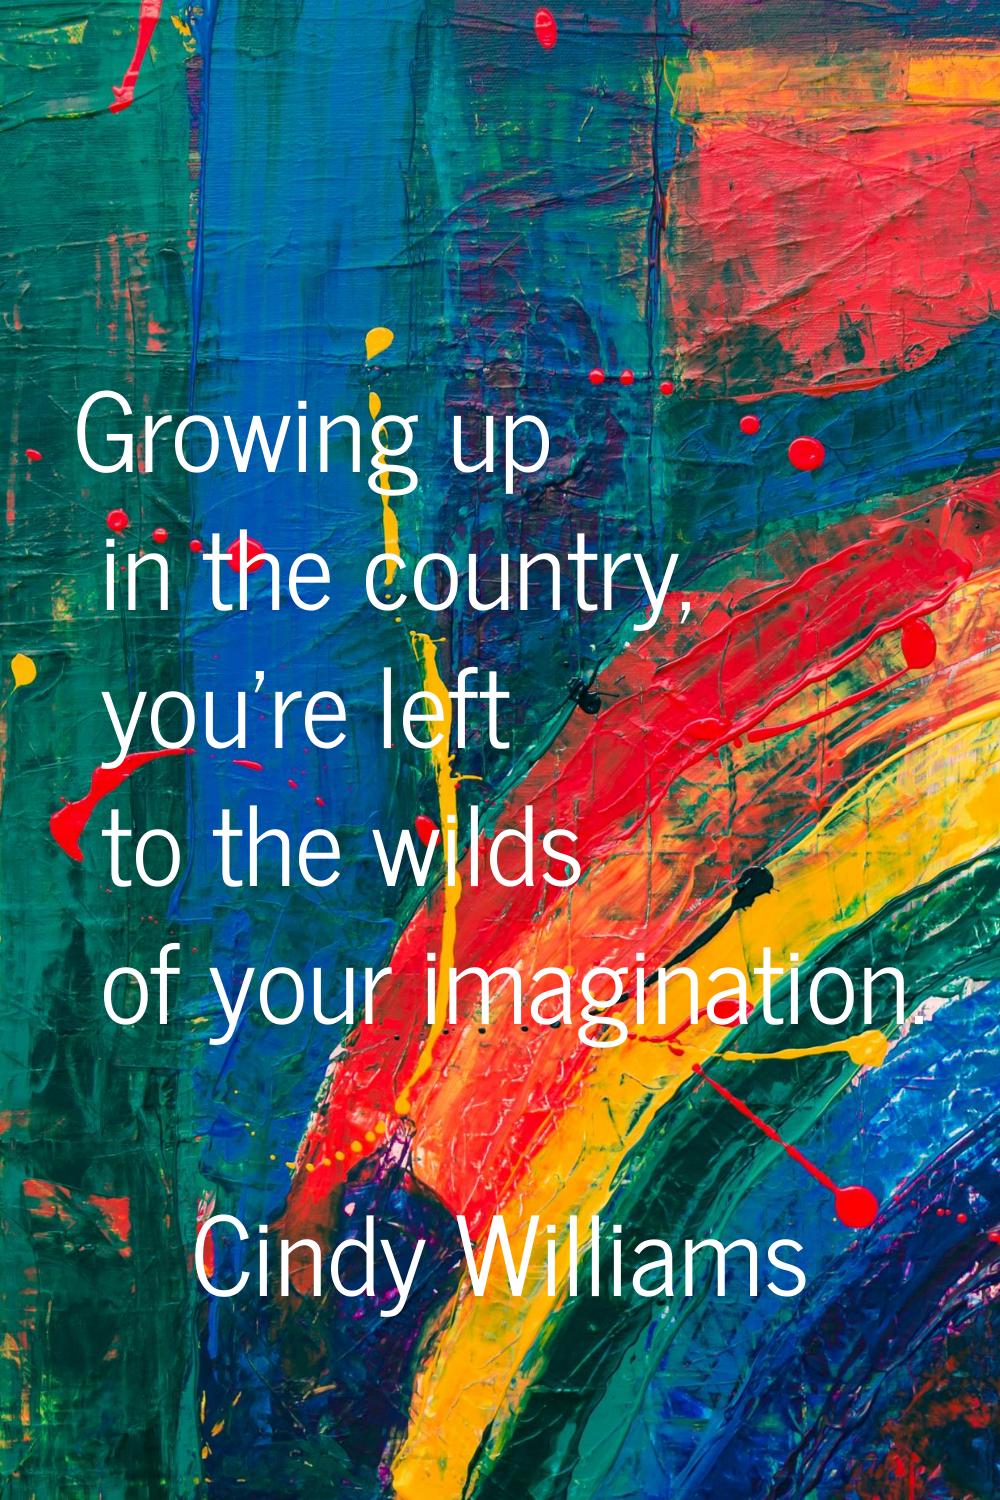 Growing up in the country, you're left to the wilds of your imagination.